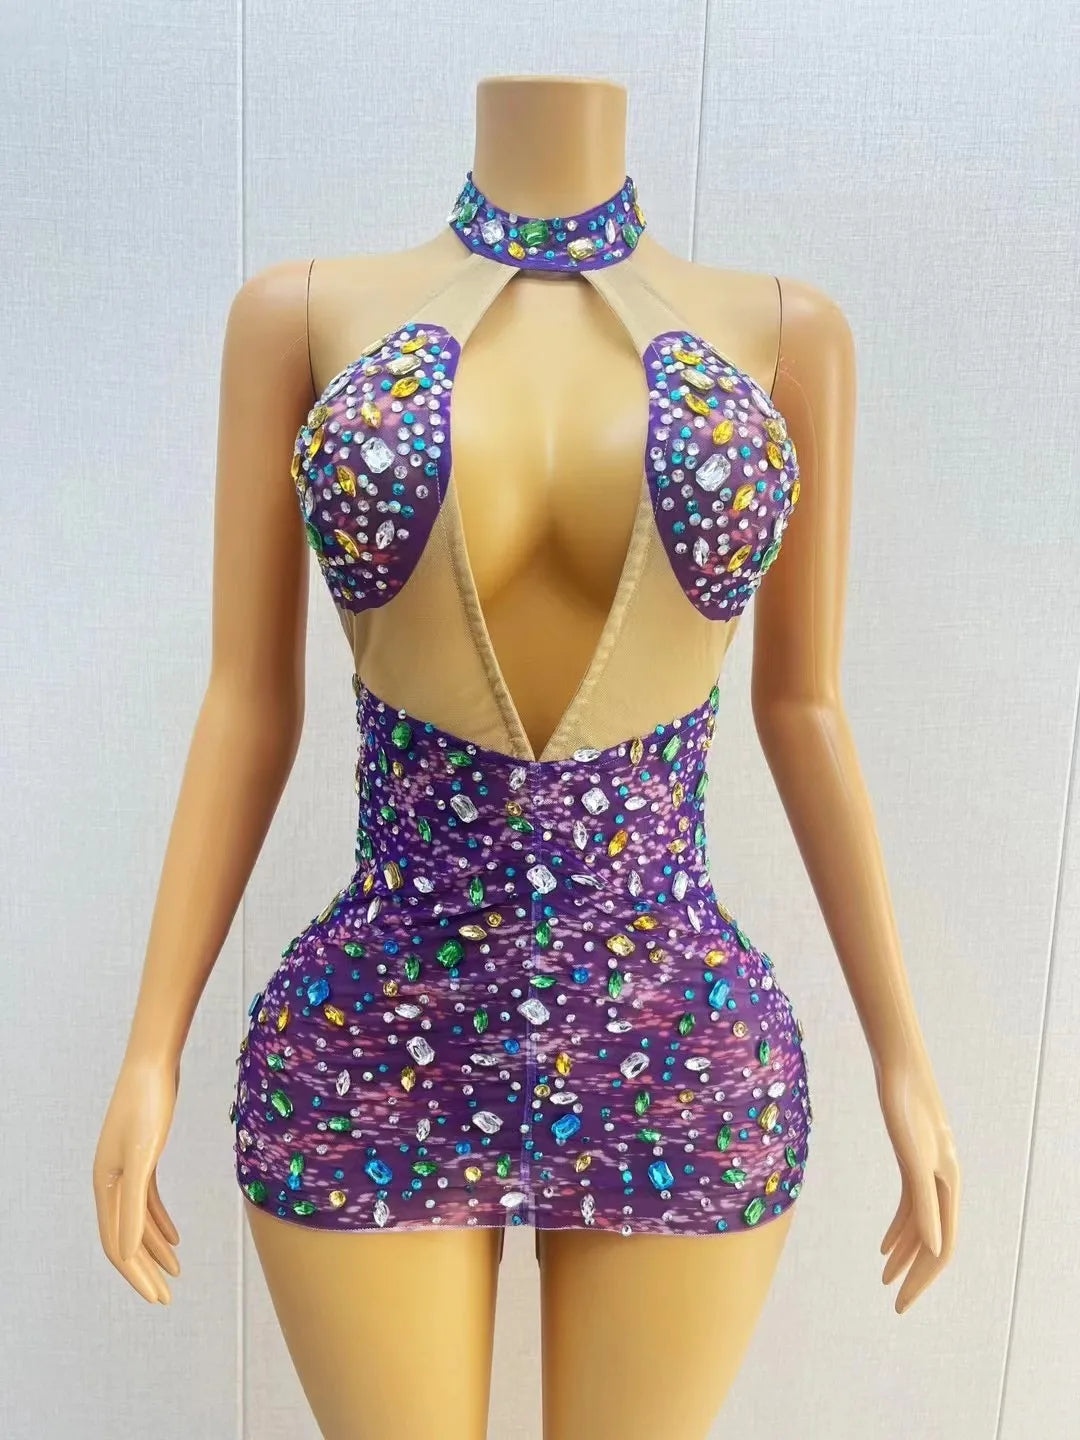 Sexy Stage Sparkly Courful Crystals Purple Mini Dress Evening Birthday Celebrate Backless Costume Prom Party Photoshoot Dress